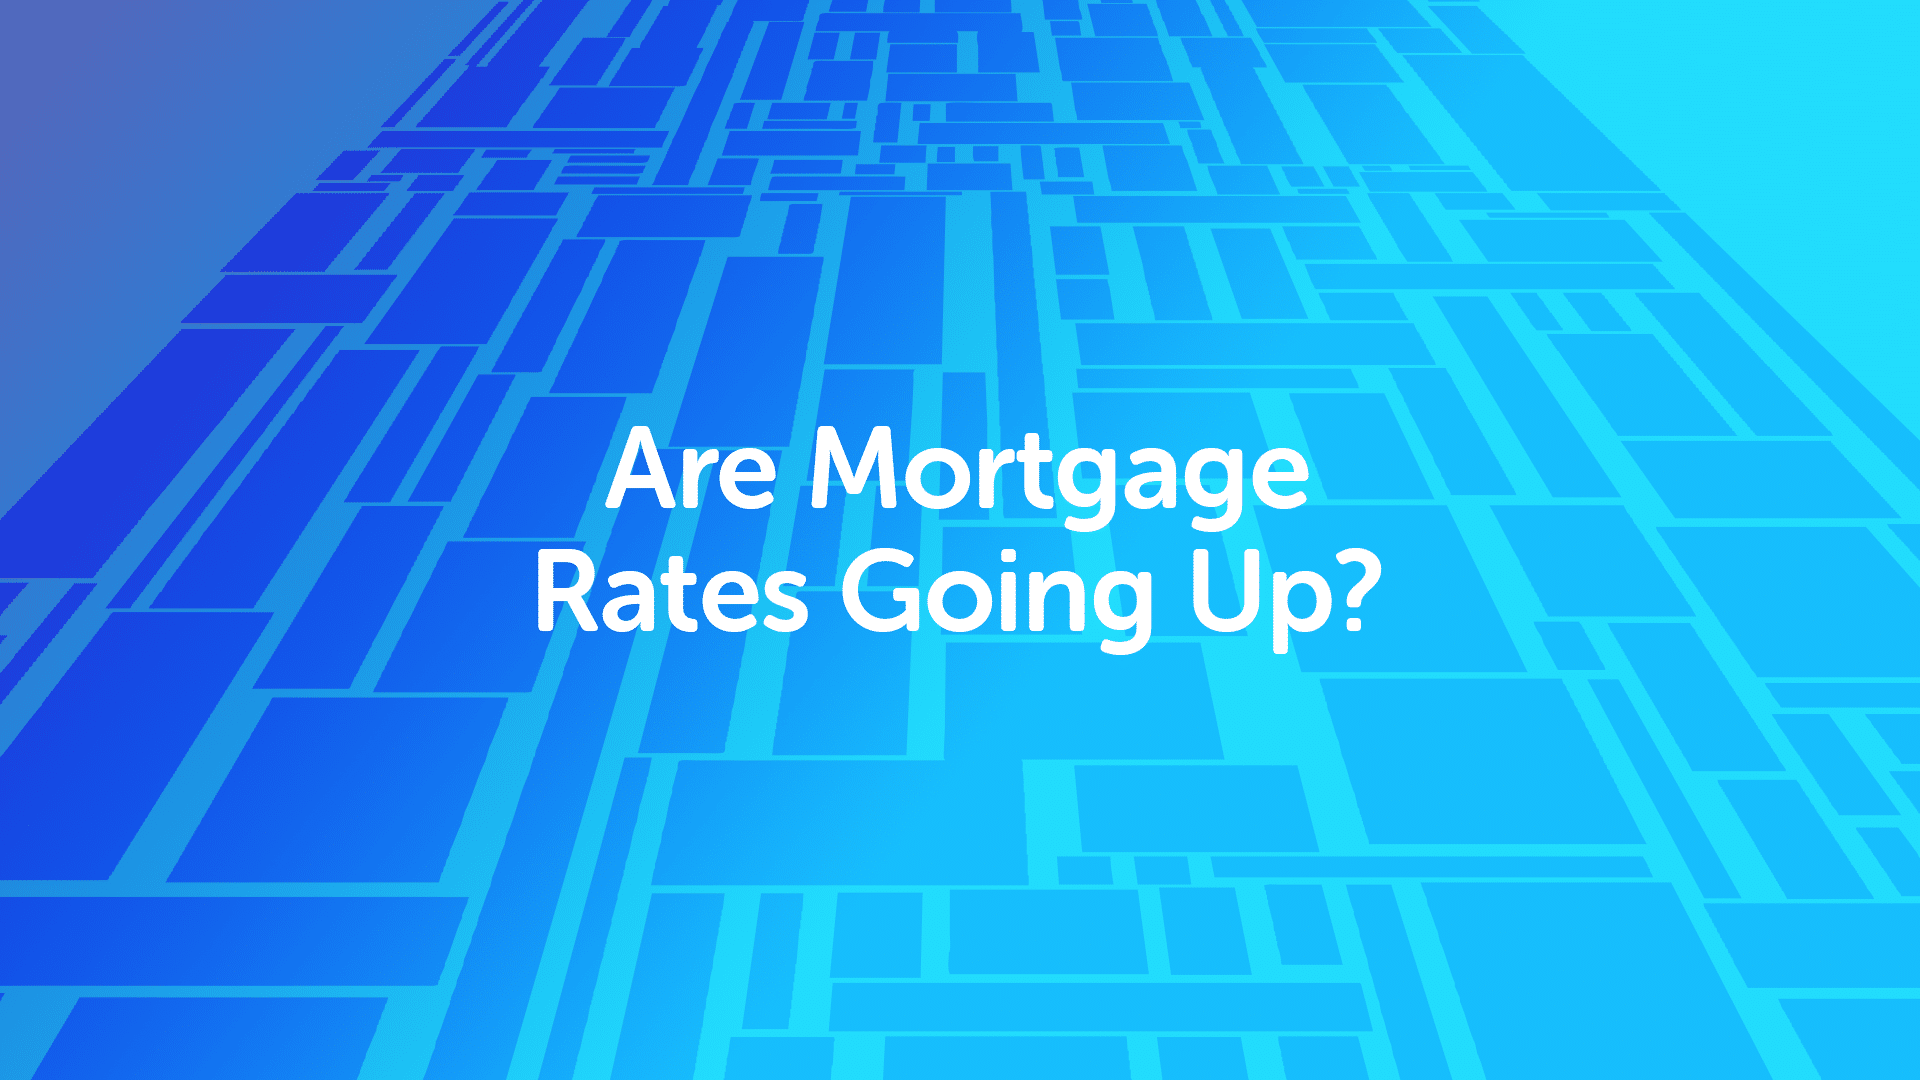 Are Mortgage Rates Going Up in Birmingham?